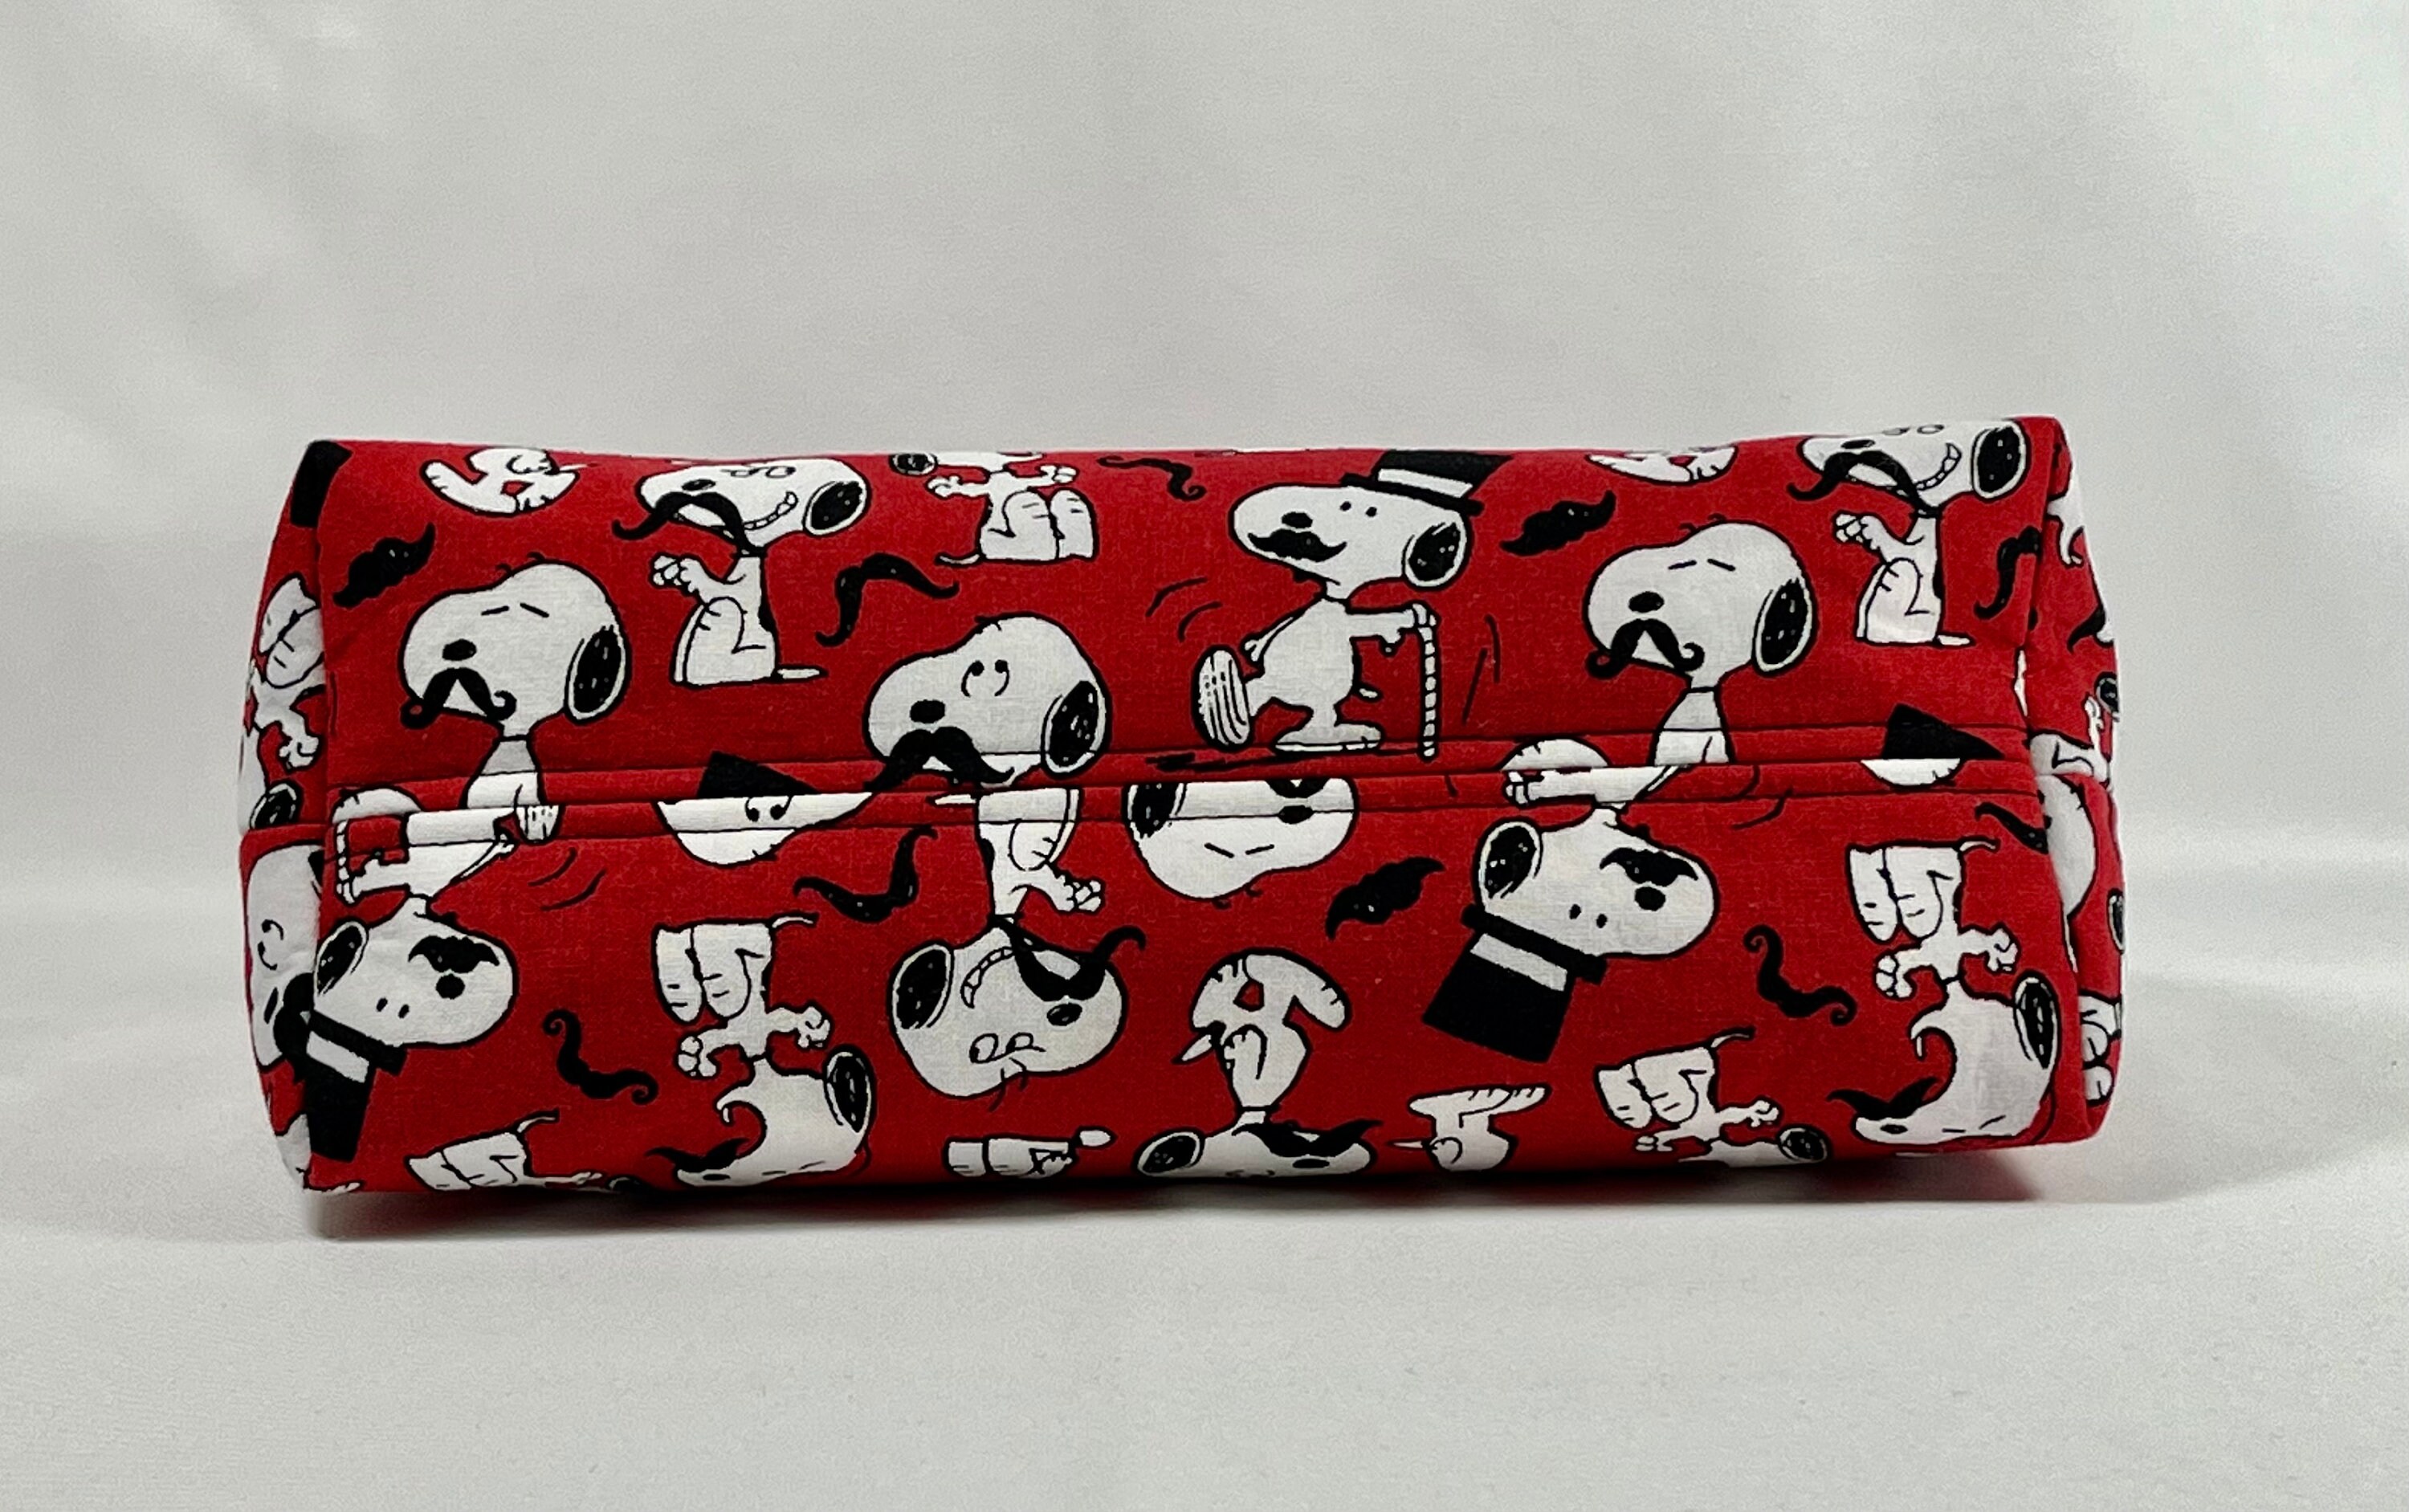 Snoopy's Mustache on Red cotton fabric Cosmetic Bag